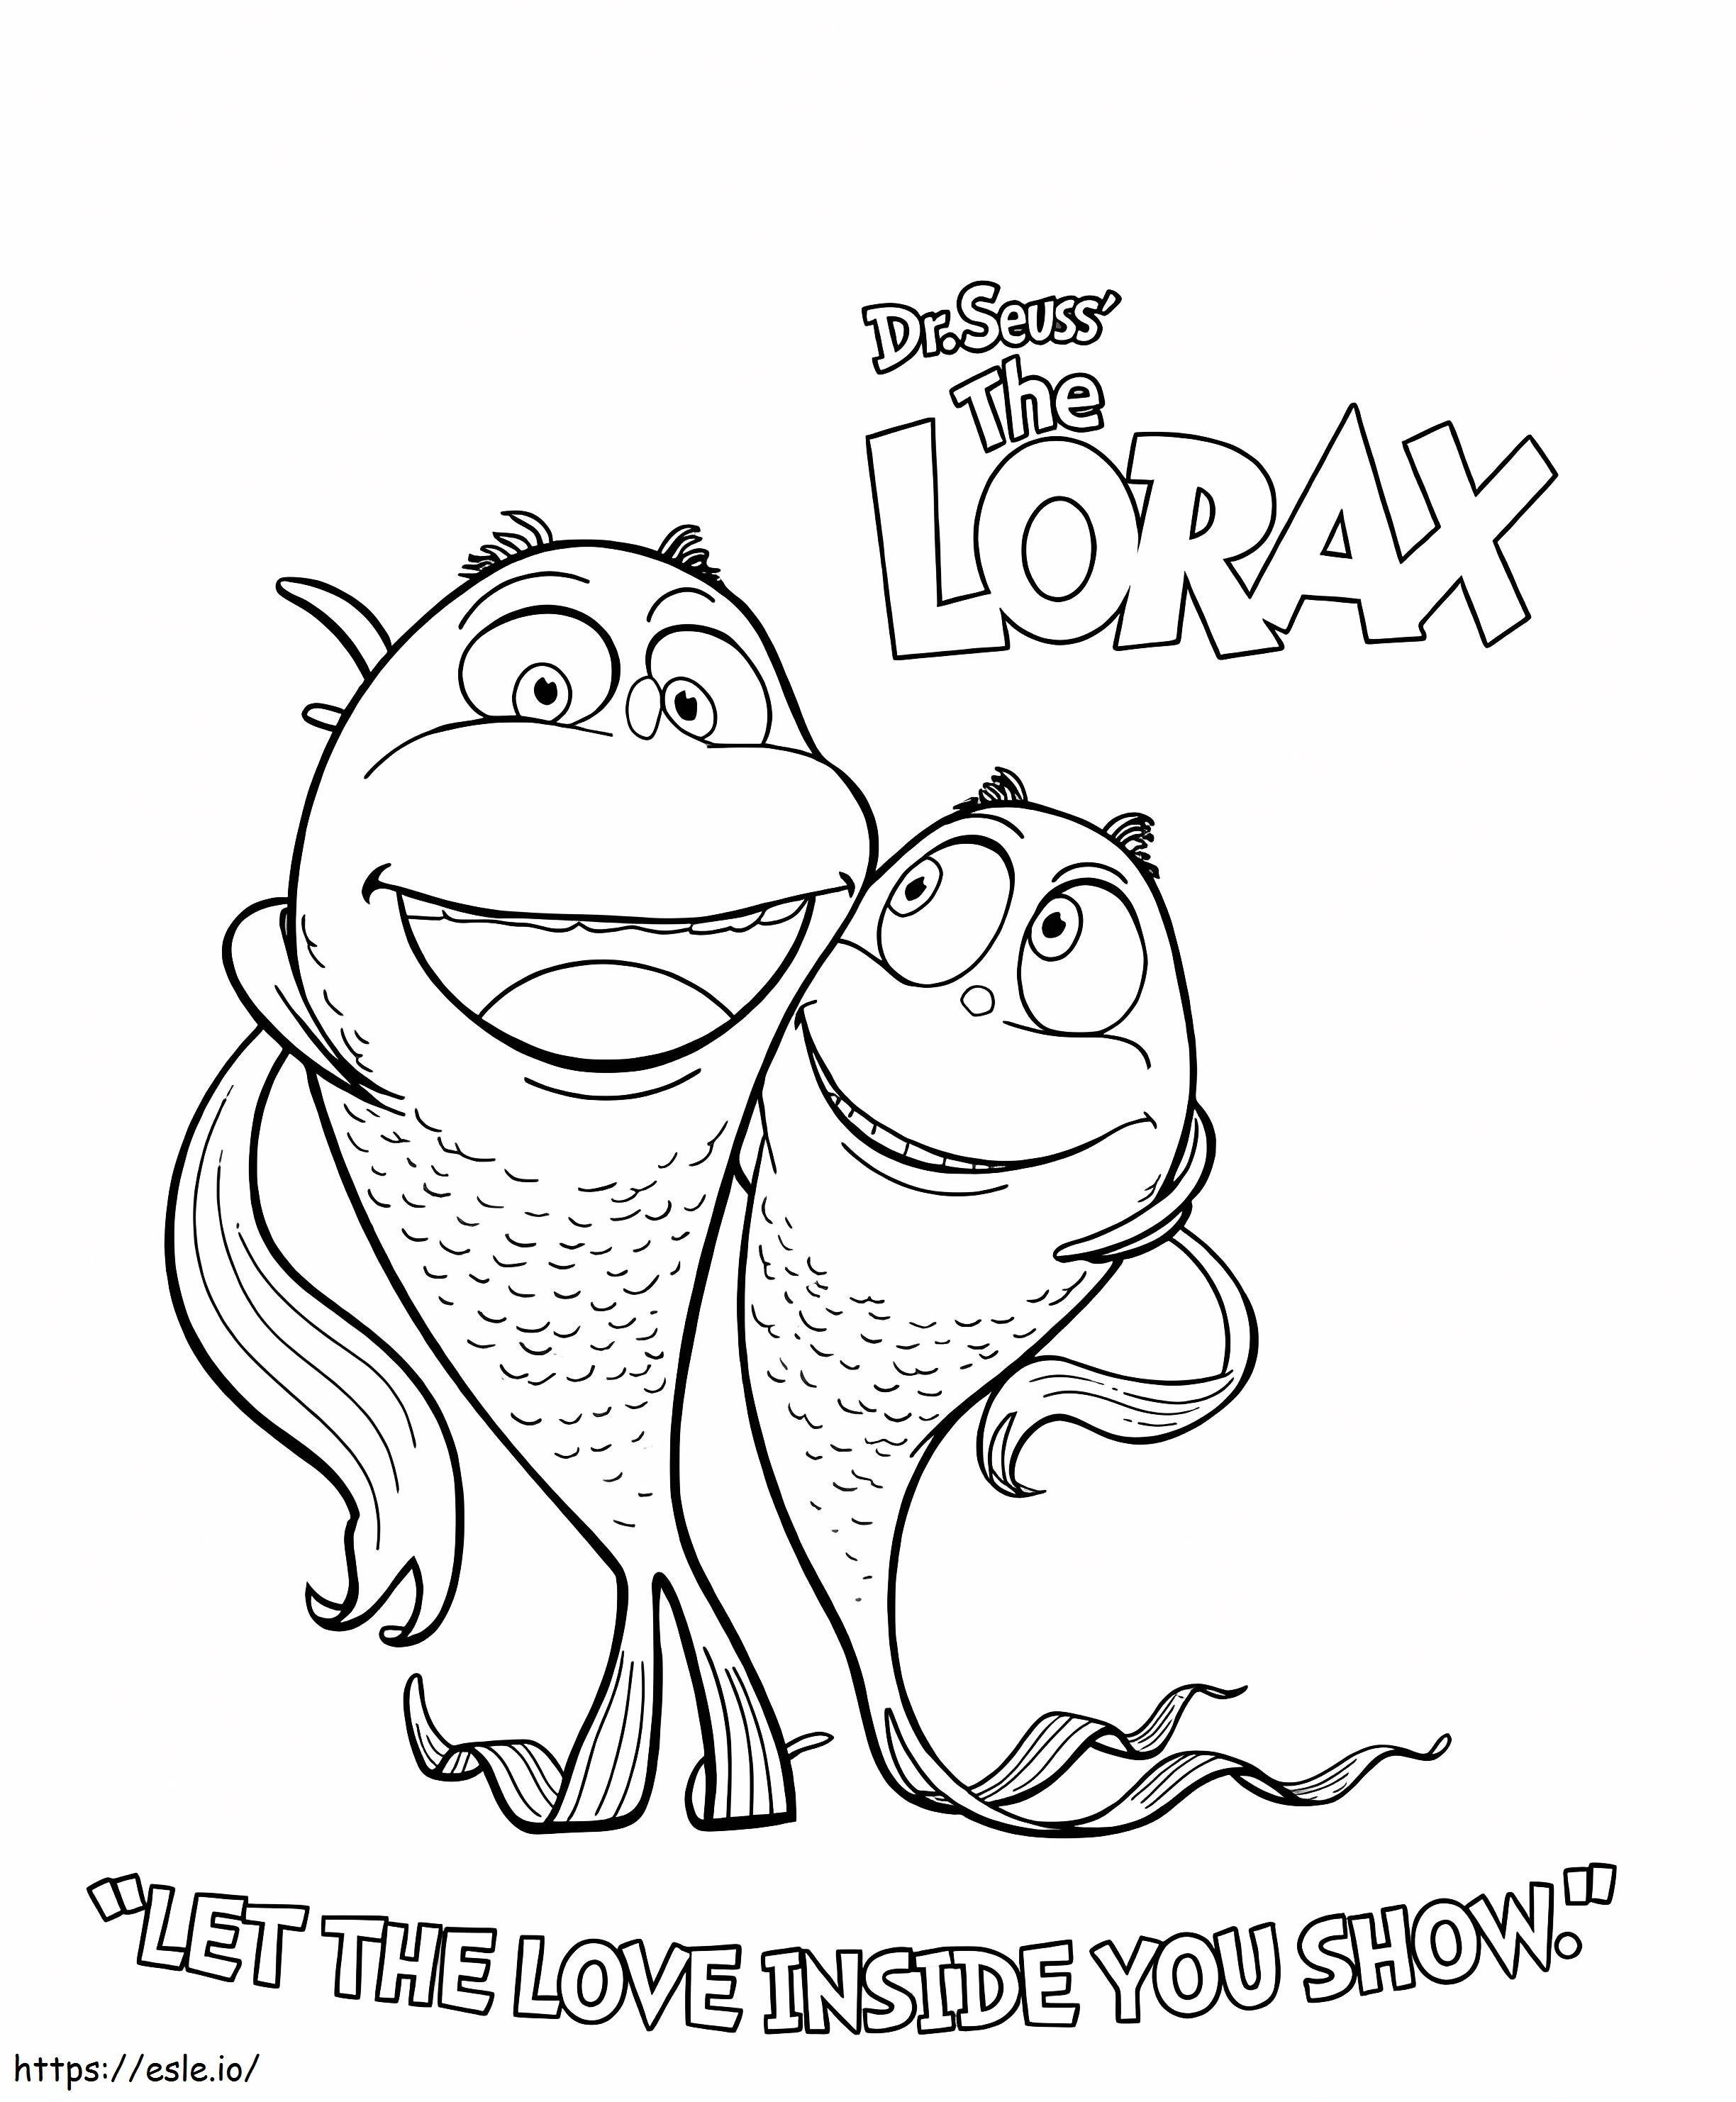 Humming Fishes From The Lorax coloring page